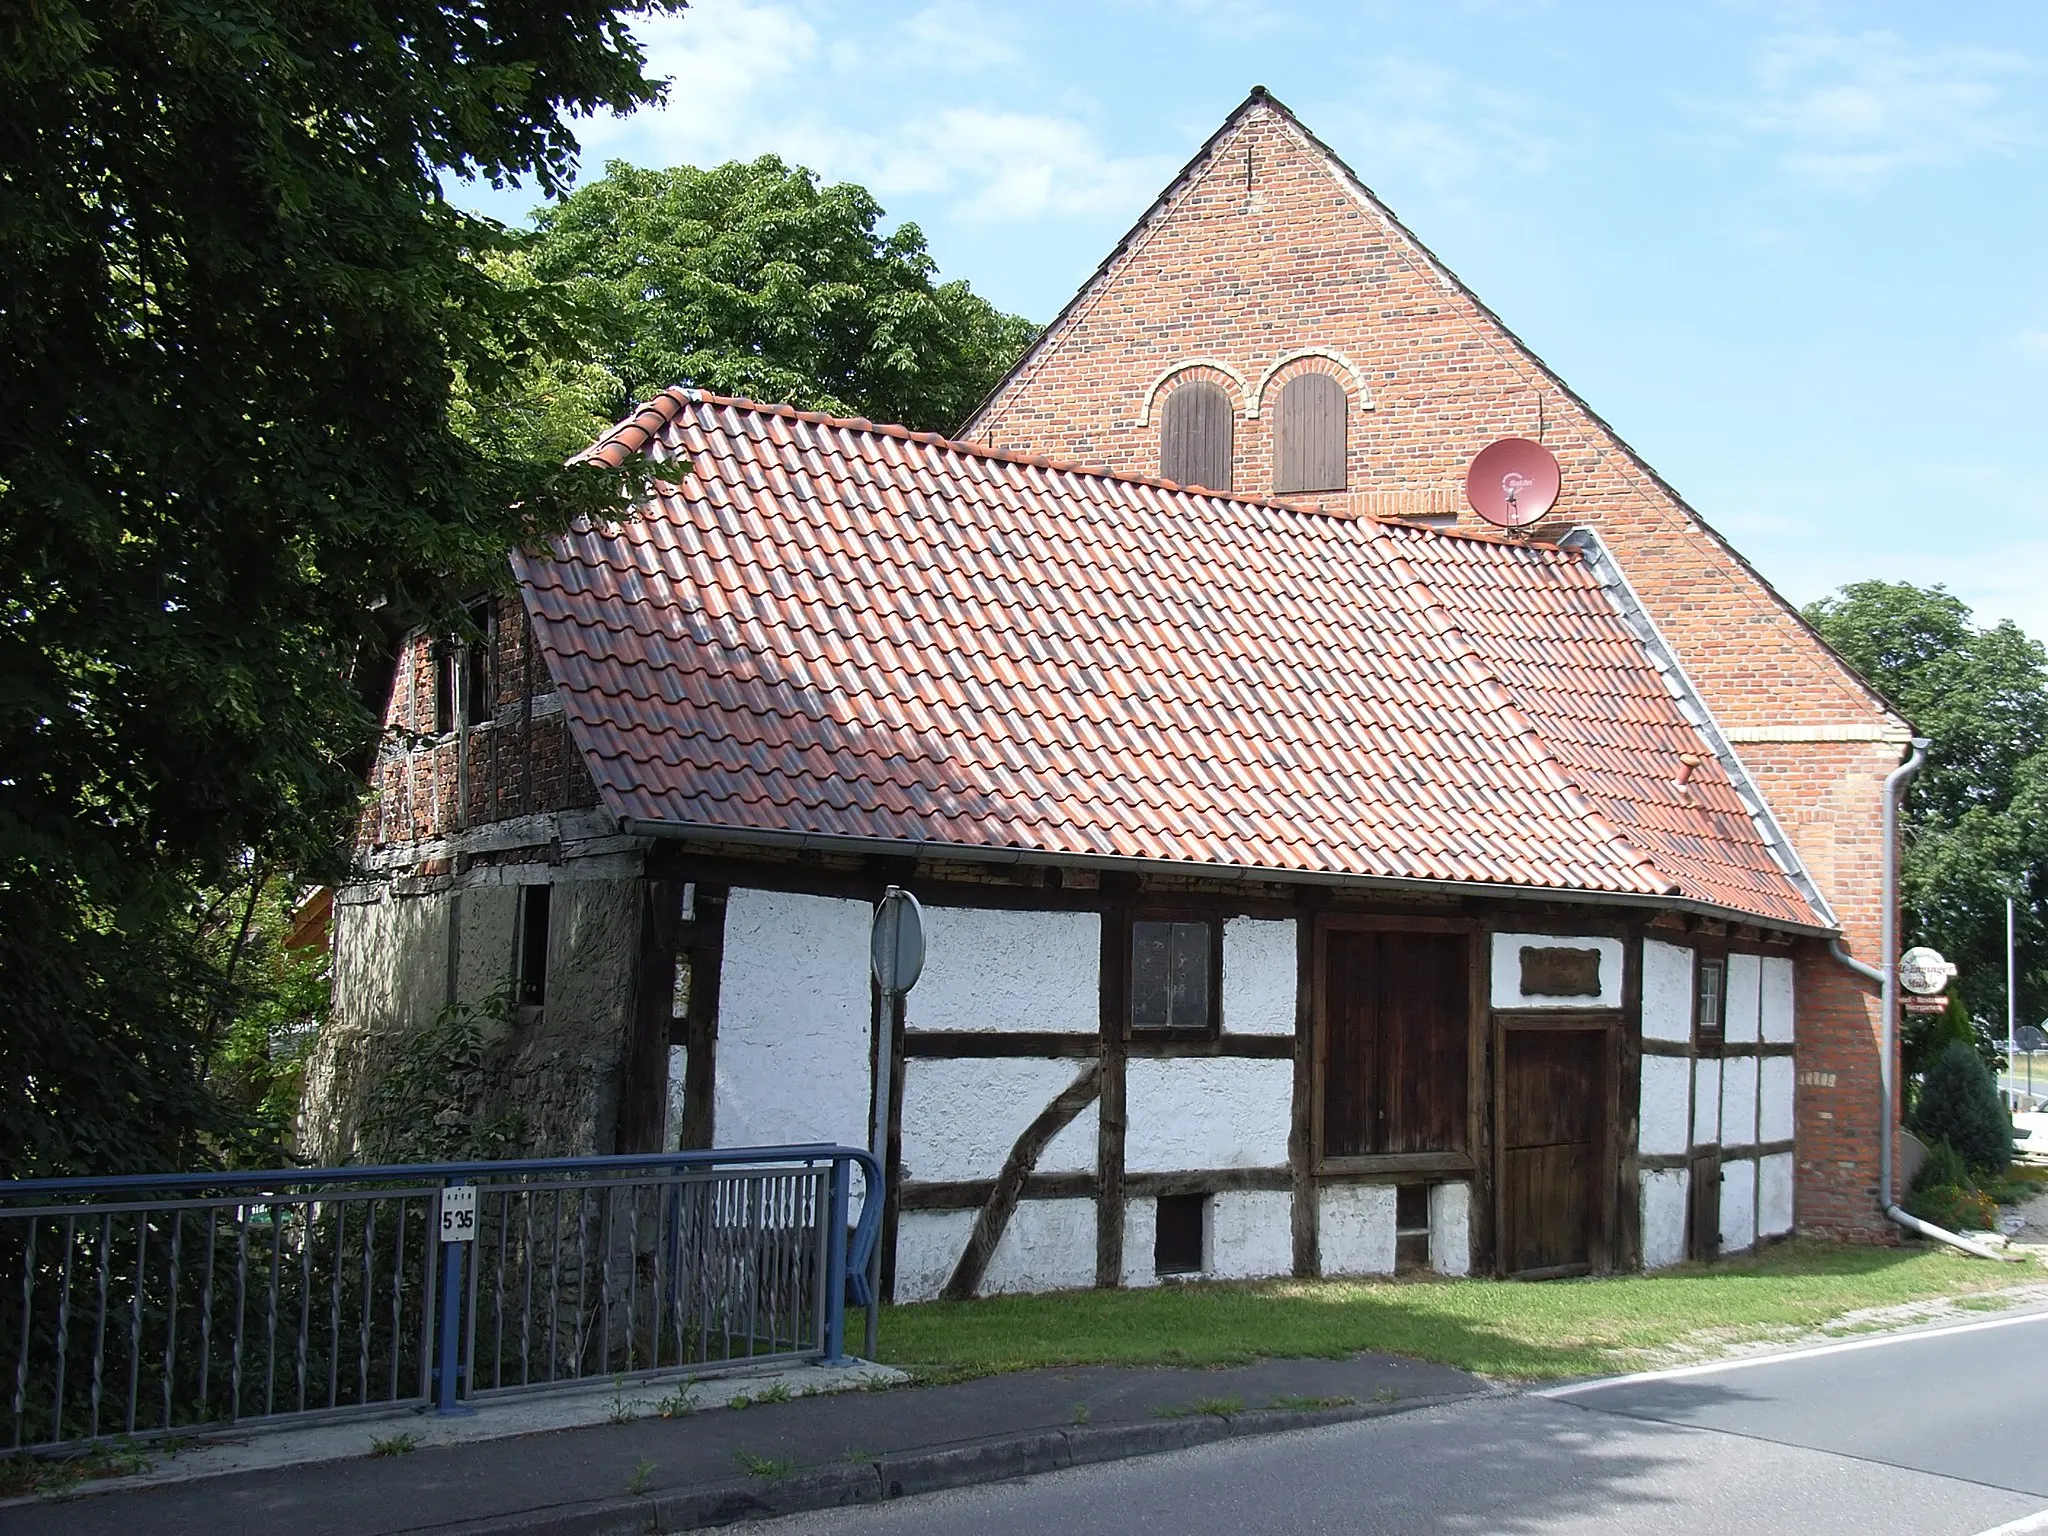 Photo showing: Elsen, Paderborn, Deutschland: Altenginger Mühle (documentary mentioned 1058 for the first time), one of the oldest mills in the region around Paderborn.